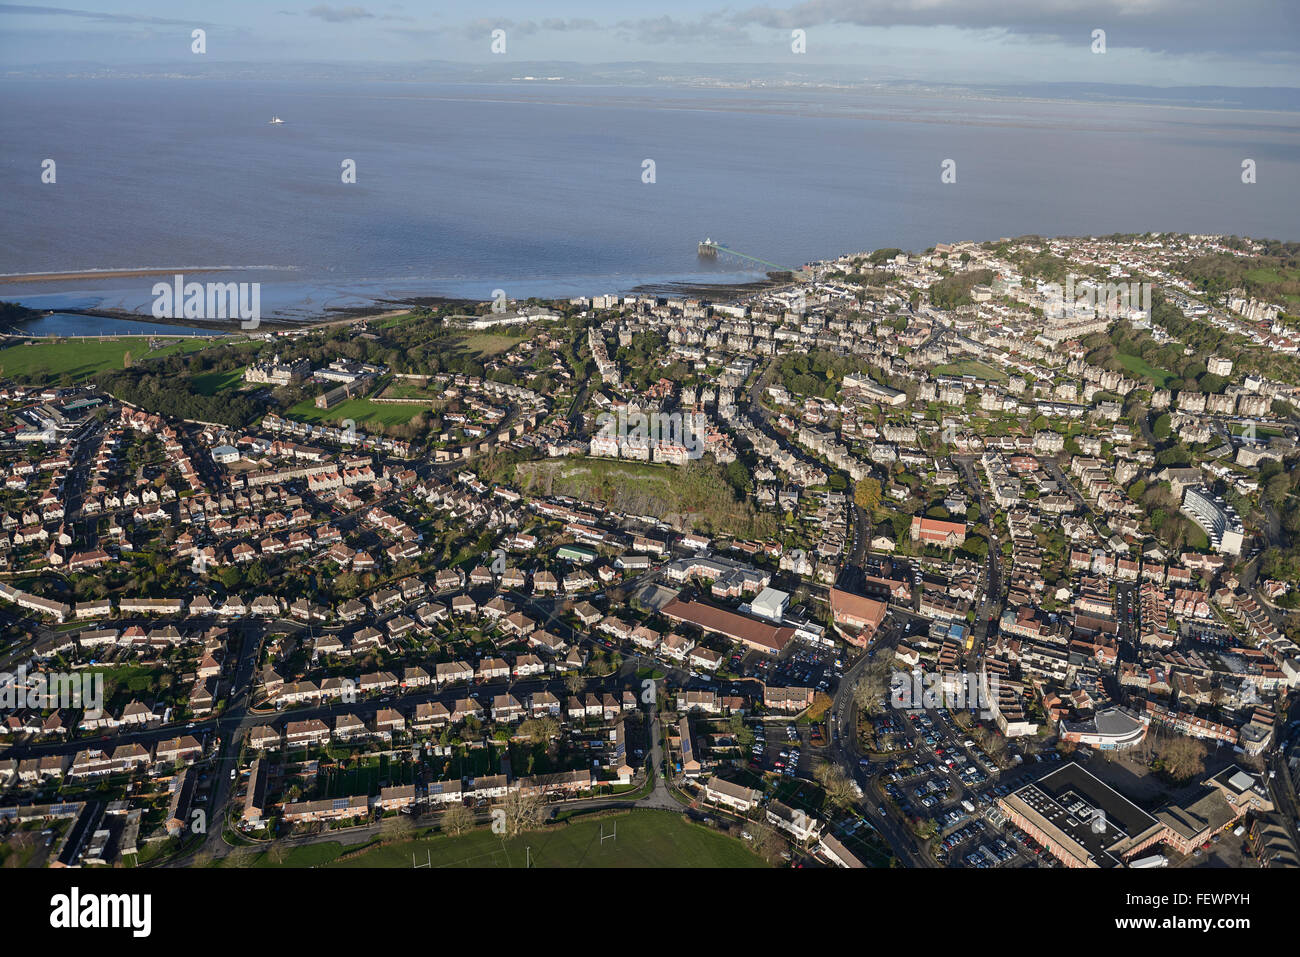 An aerial view of the Somerset town of Clevedon, looking across the Bristol Channel with Newport visible in the distance Stock Photo